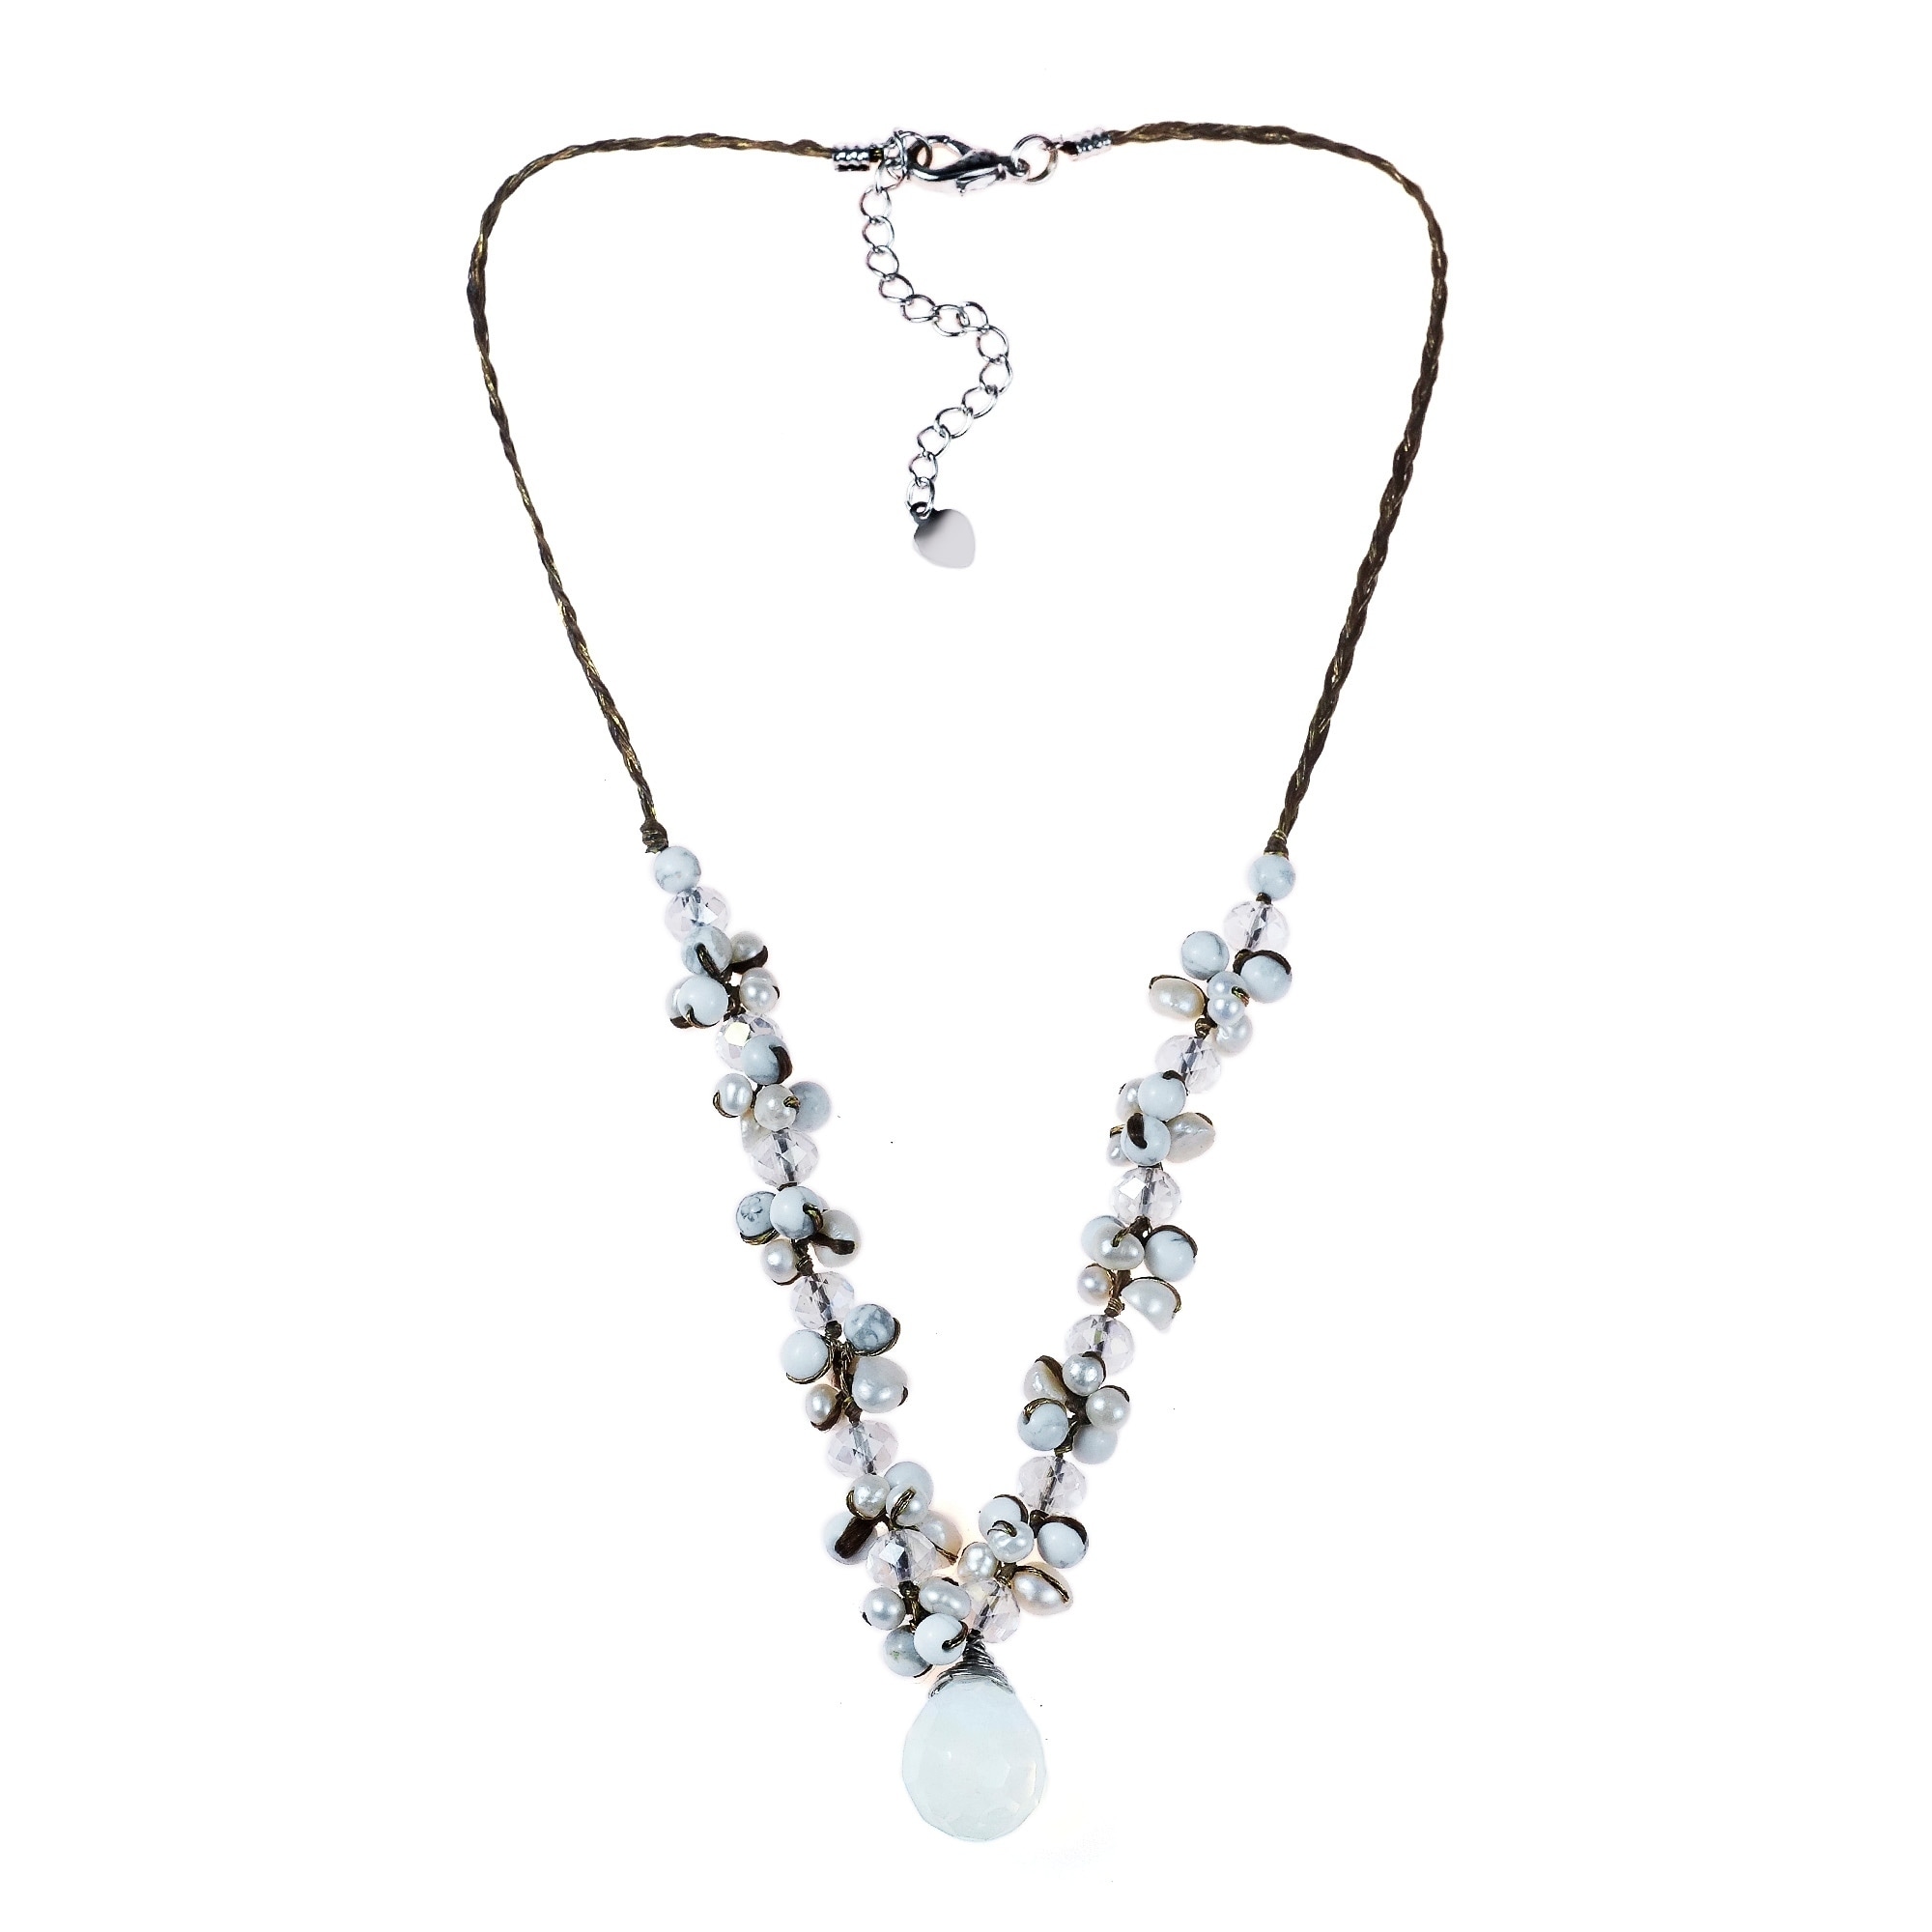 Moonstone Tears Pearl Glow Silk Thread Necklace (Thailand) Today $27